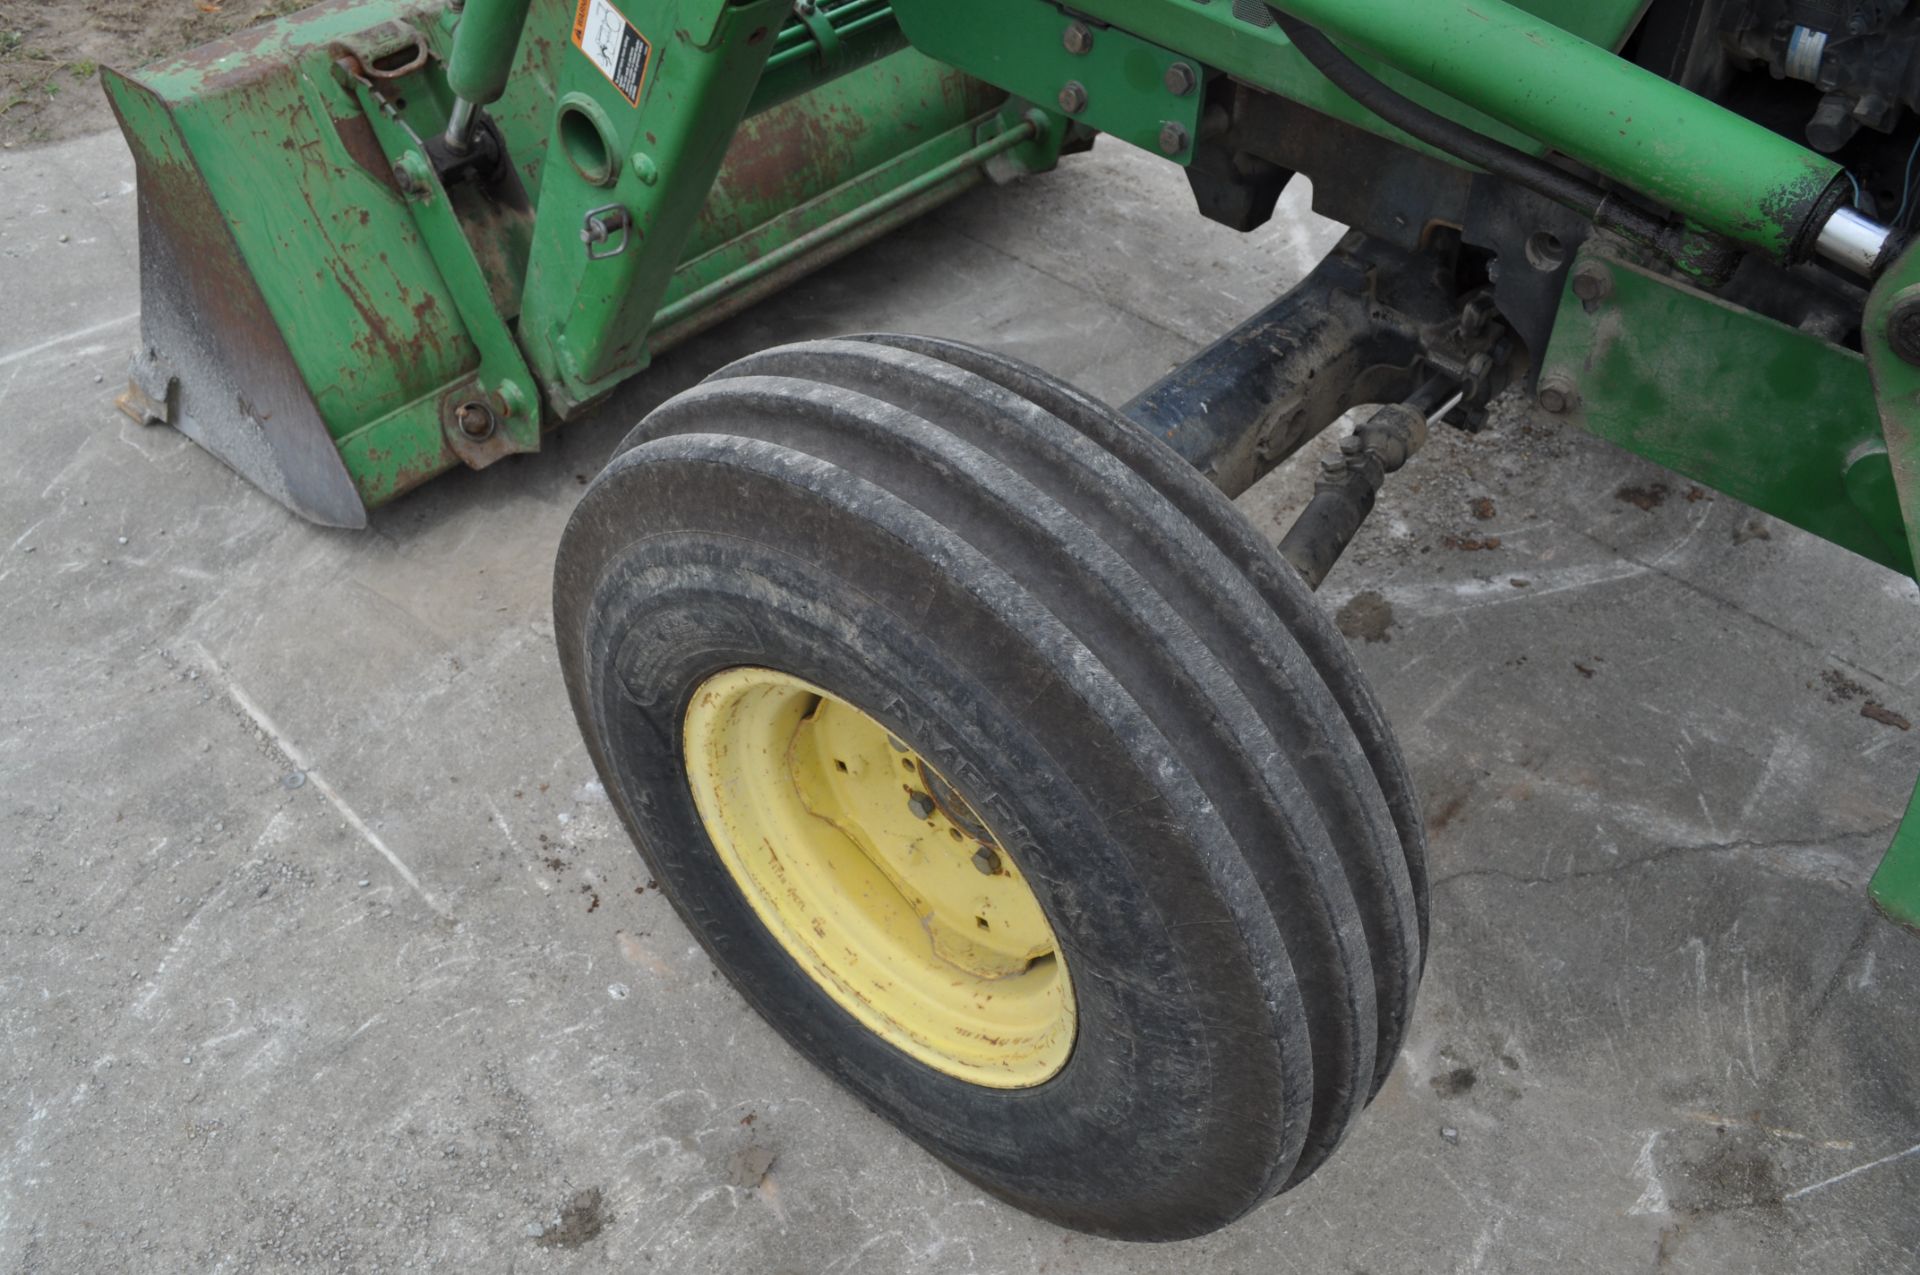 John Deere 5410 tractor, 2WD, w/ 520 loader, 16.9-30 rear tires, 11 L 15.5 front tires, 4090 hrs - Image 6 of 15